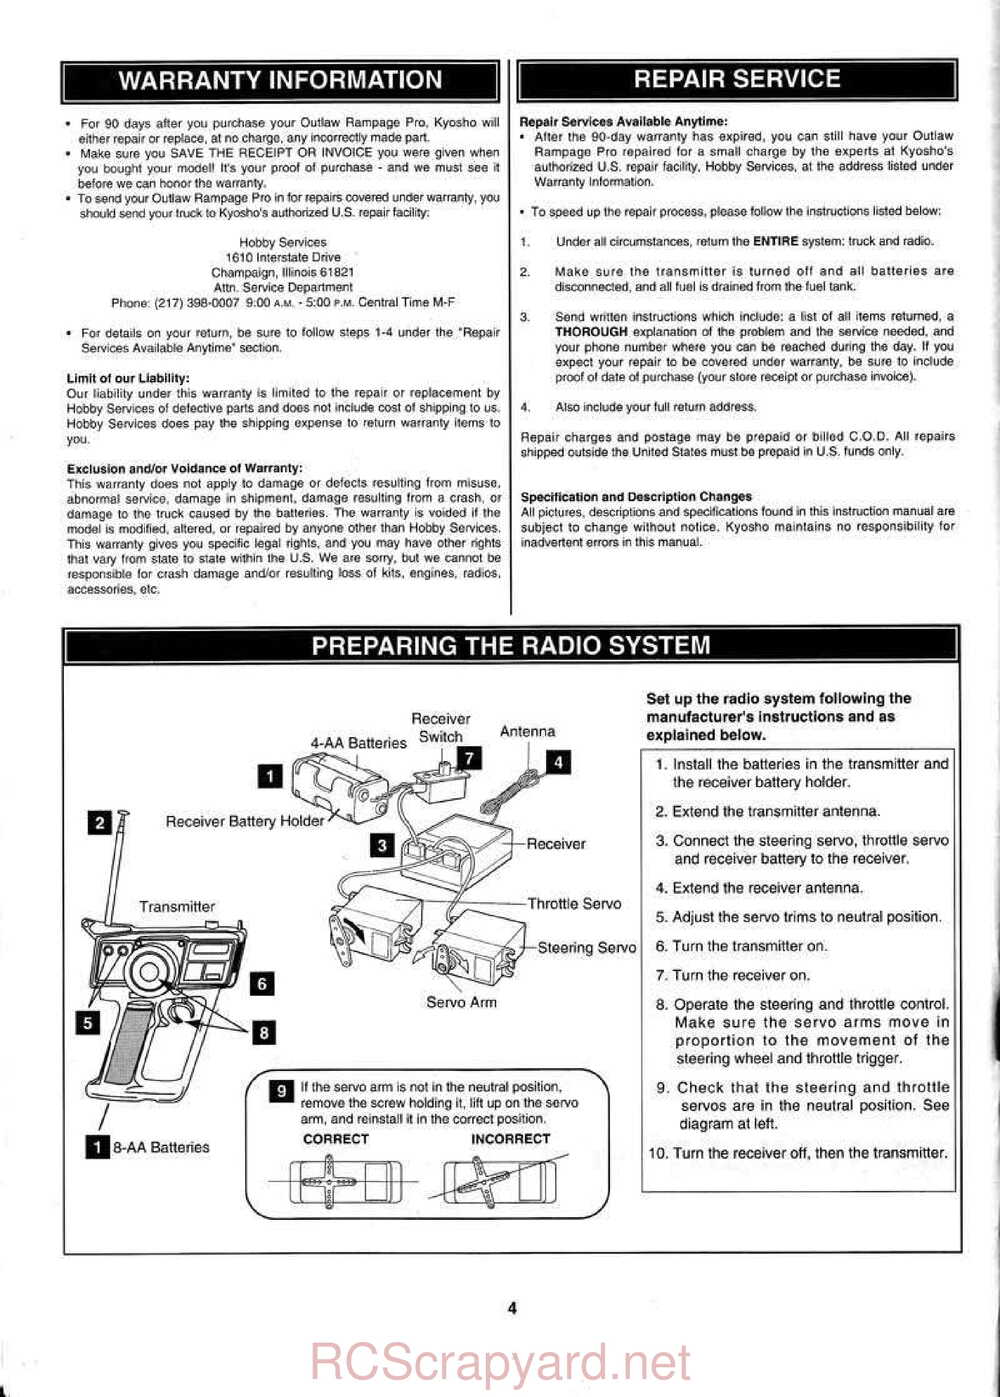 Kyosho - 31324 - 31326 - Outlaw-Rampage - Manual - Page 04